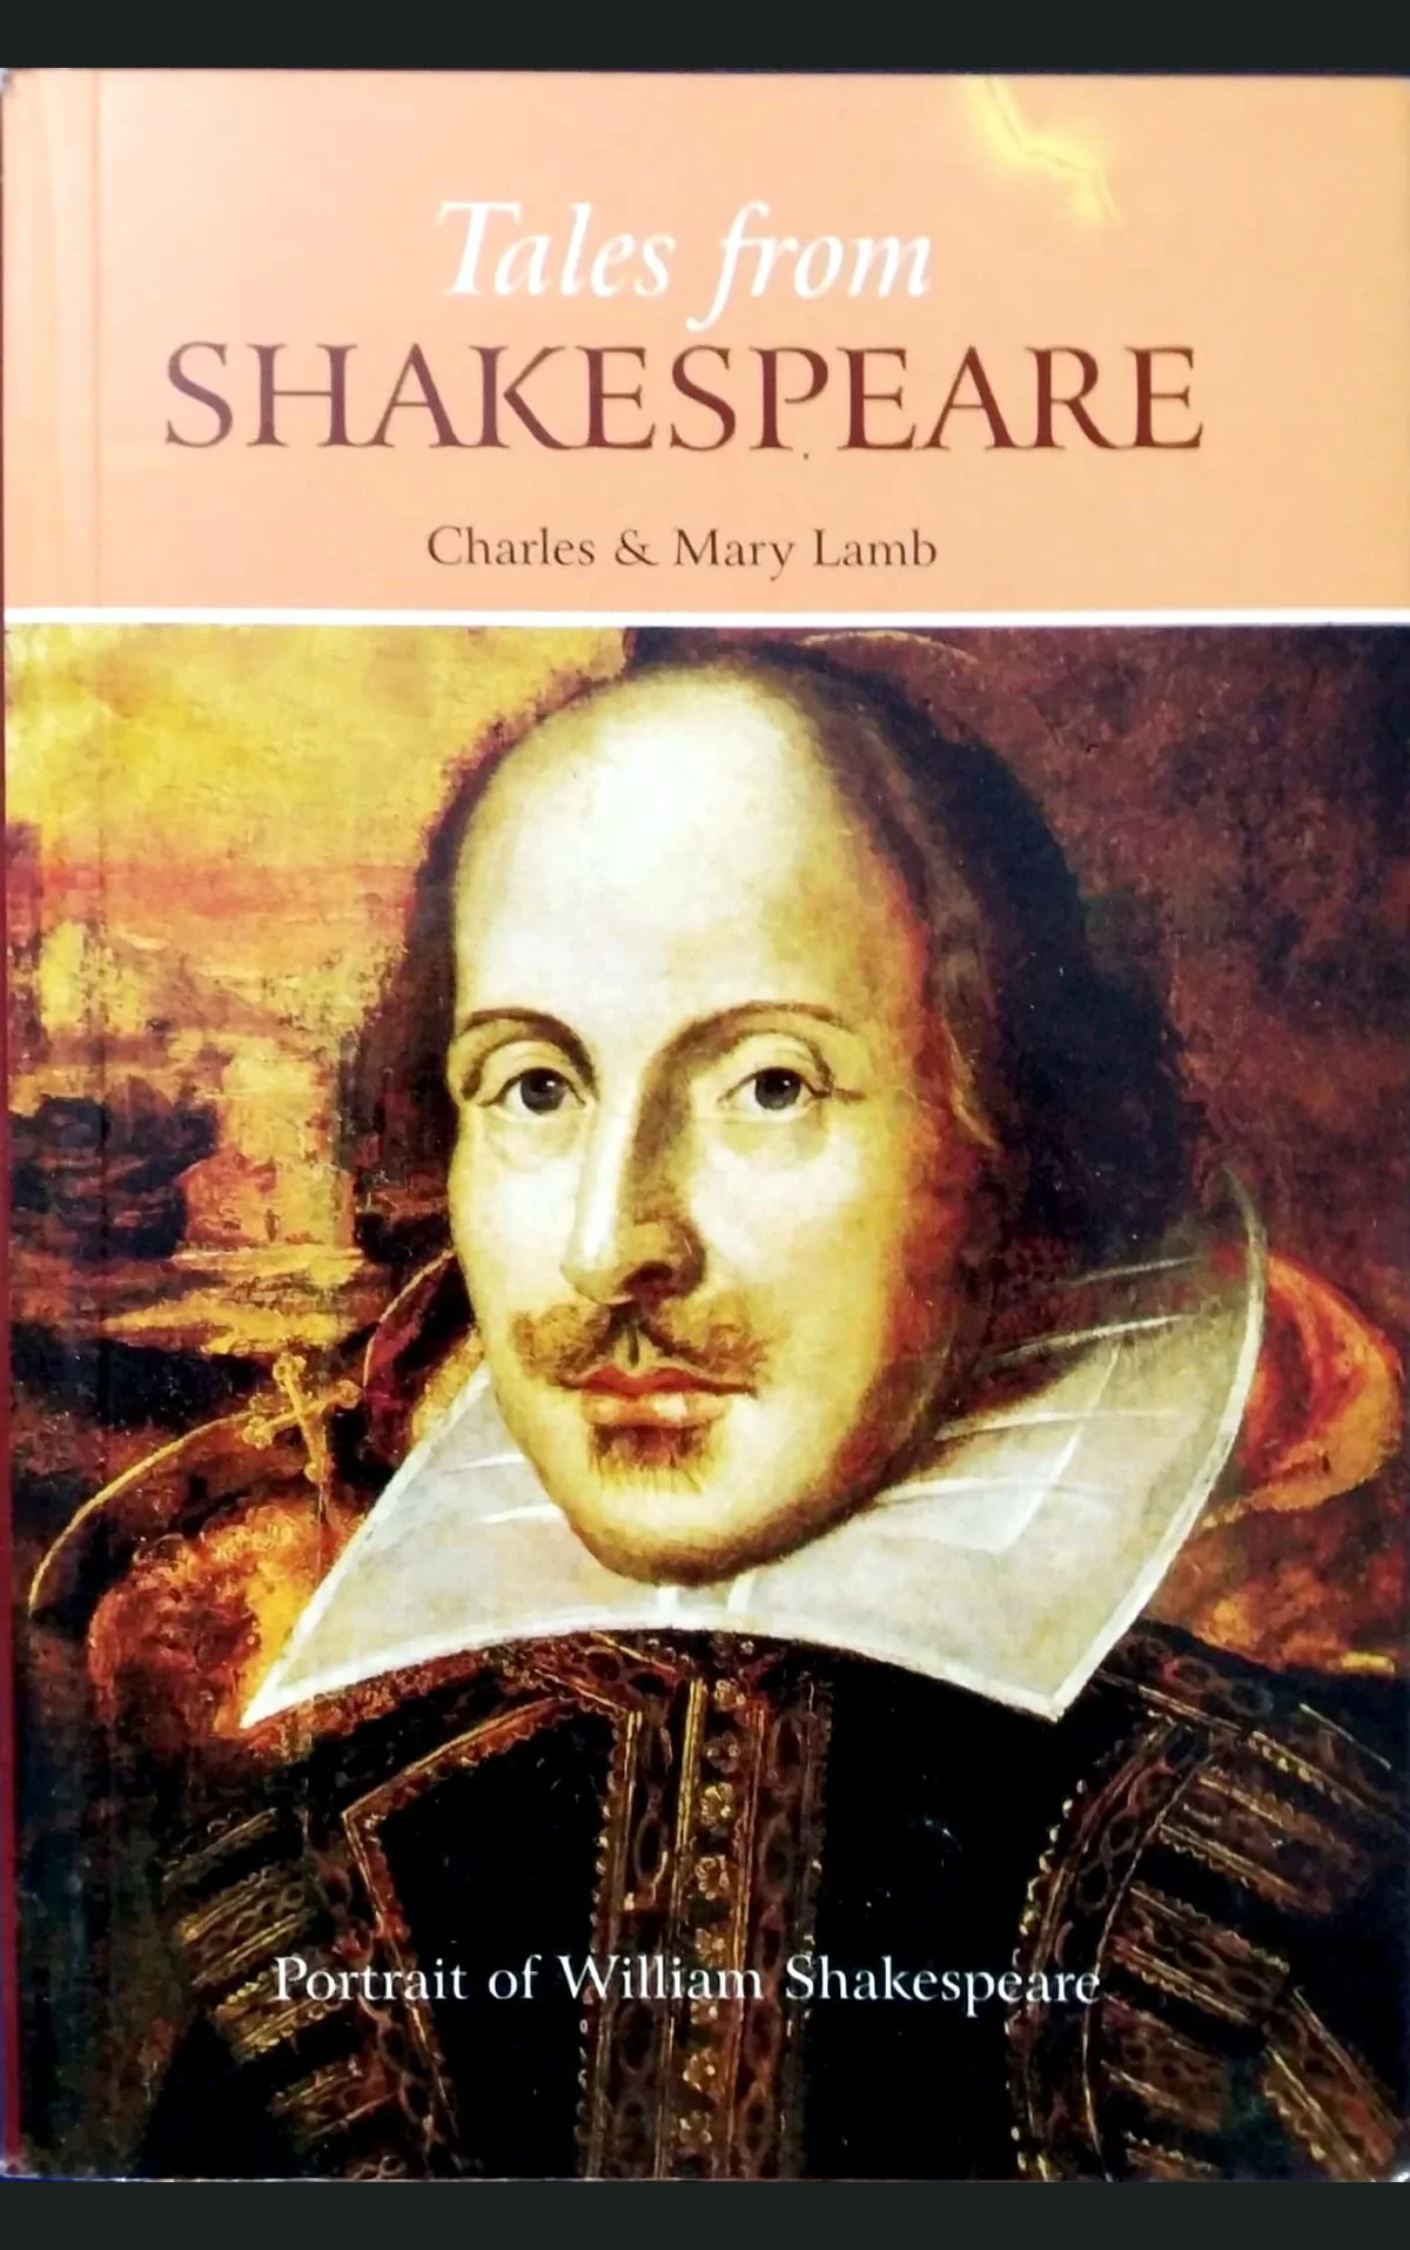 TALES FROM SHAKESPEARE by CHARLES AND MARY LAMB